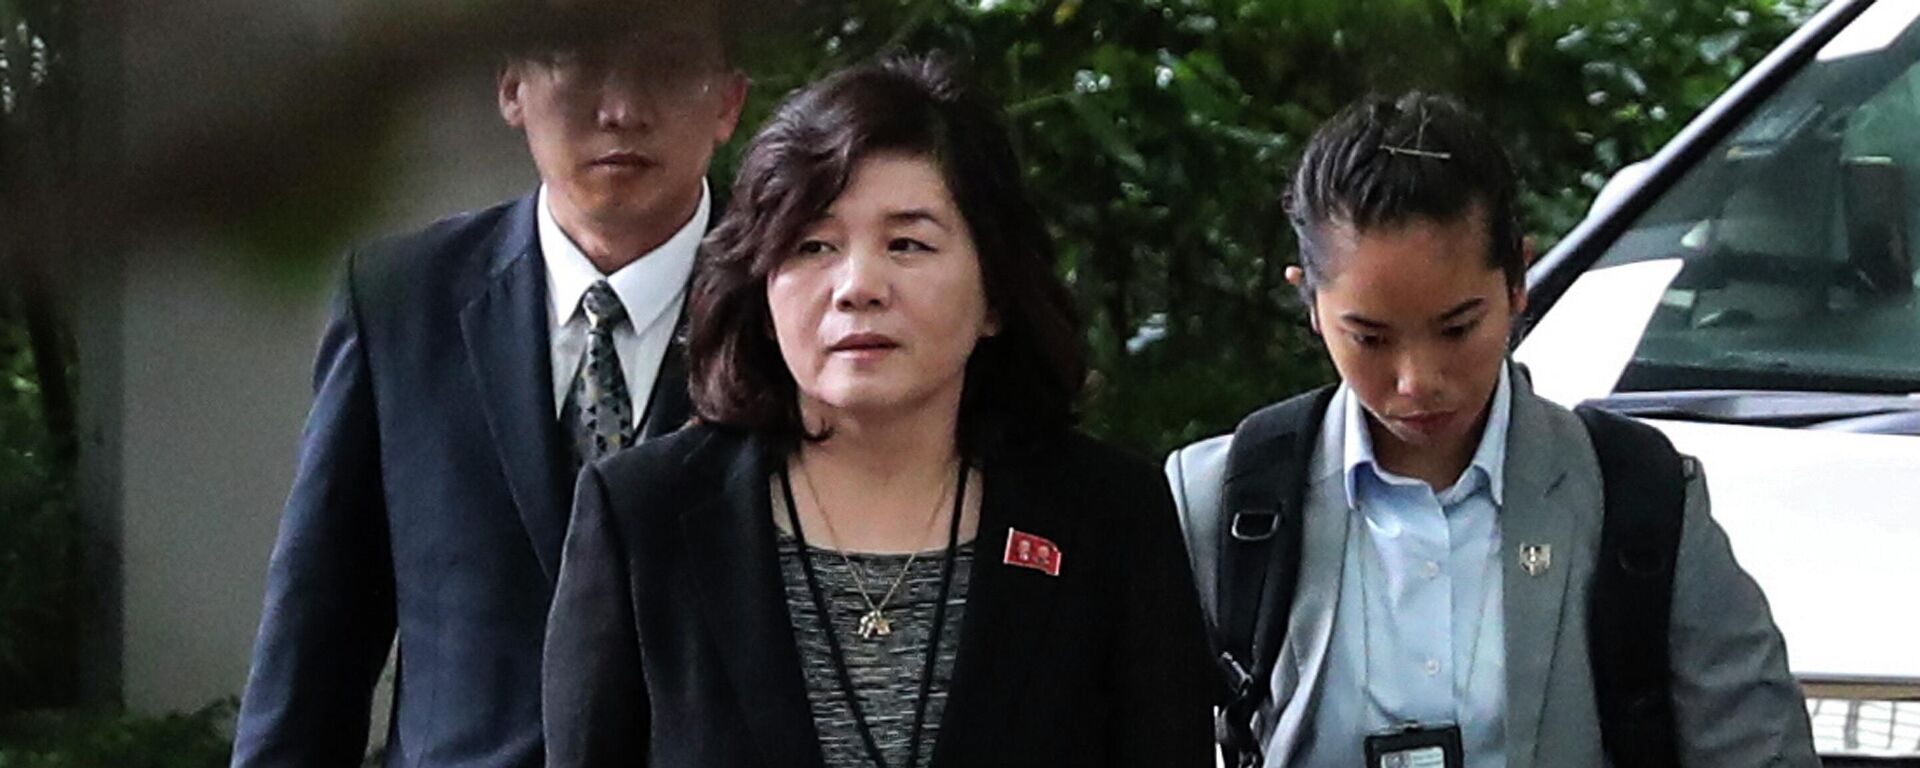 In this June 11, 2018 file photo, North Korean Vice Foreign Minister Choe Son Hui, center, arrives for a meeting with U.S. Ambassador to the Philippines Sung Kim at the Ritz-Carlton Millenia Hotel in Singapore ahead of the summit between U.S. President Donald Trump and North Korean leader Kim Jong Un. Choe is the highest-level female diplomat in North Korea. - Sputnik International, 1920, 12.06.2022